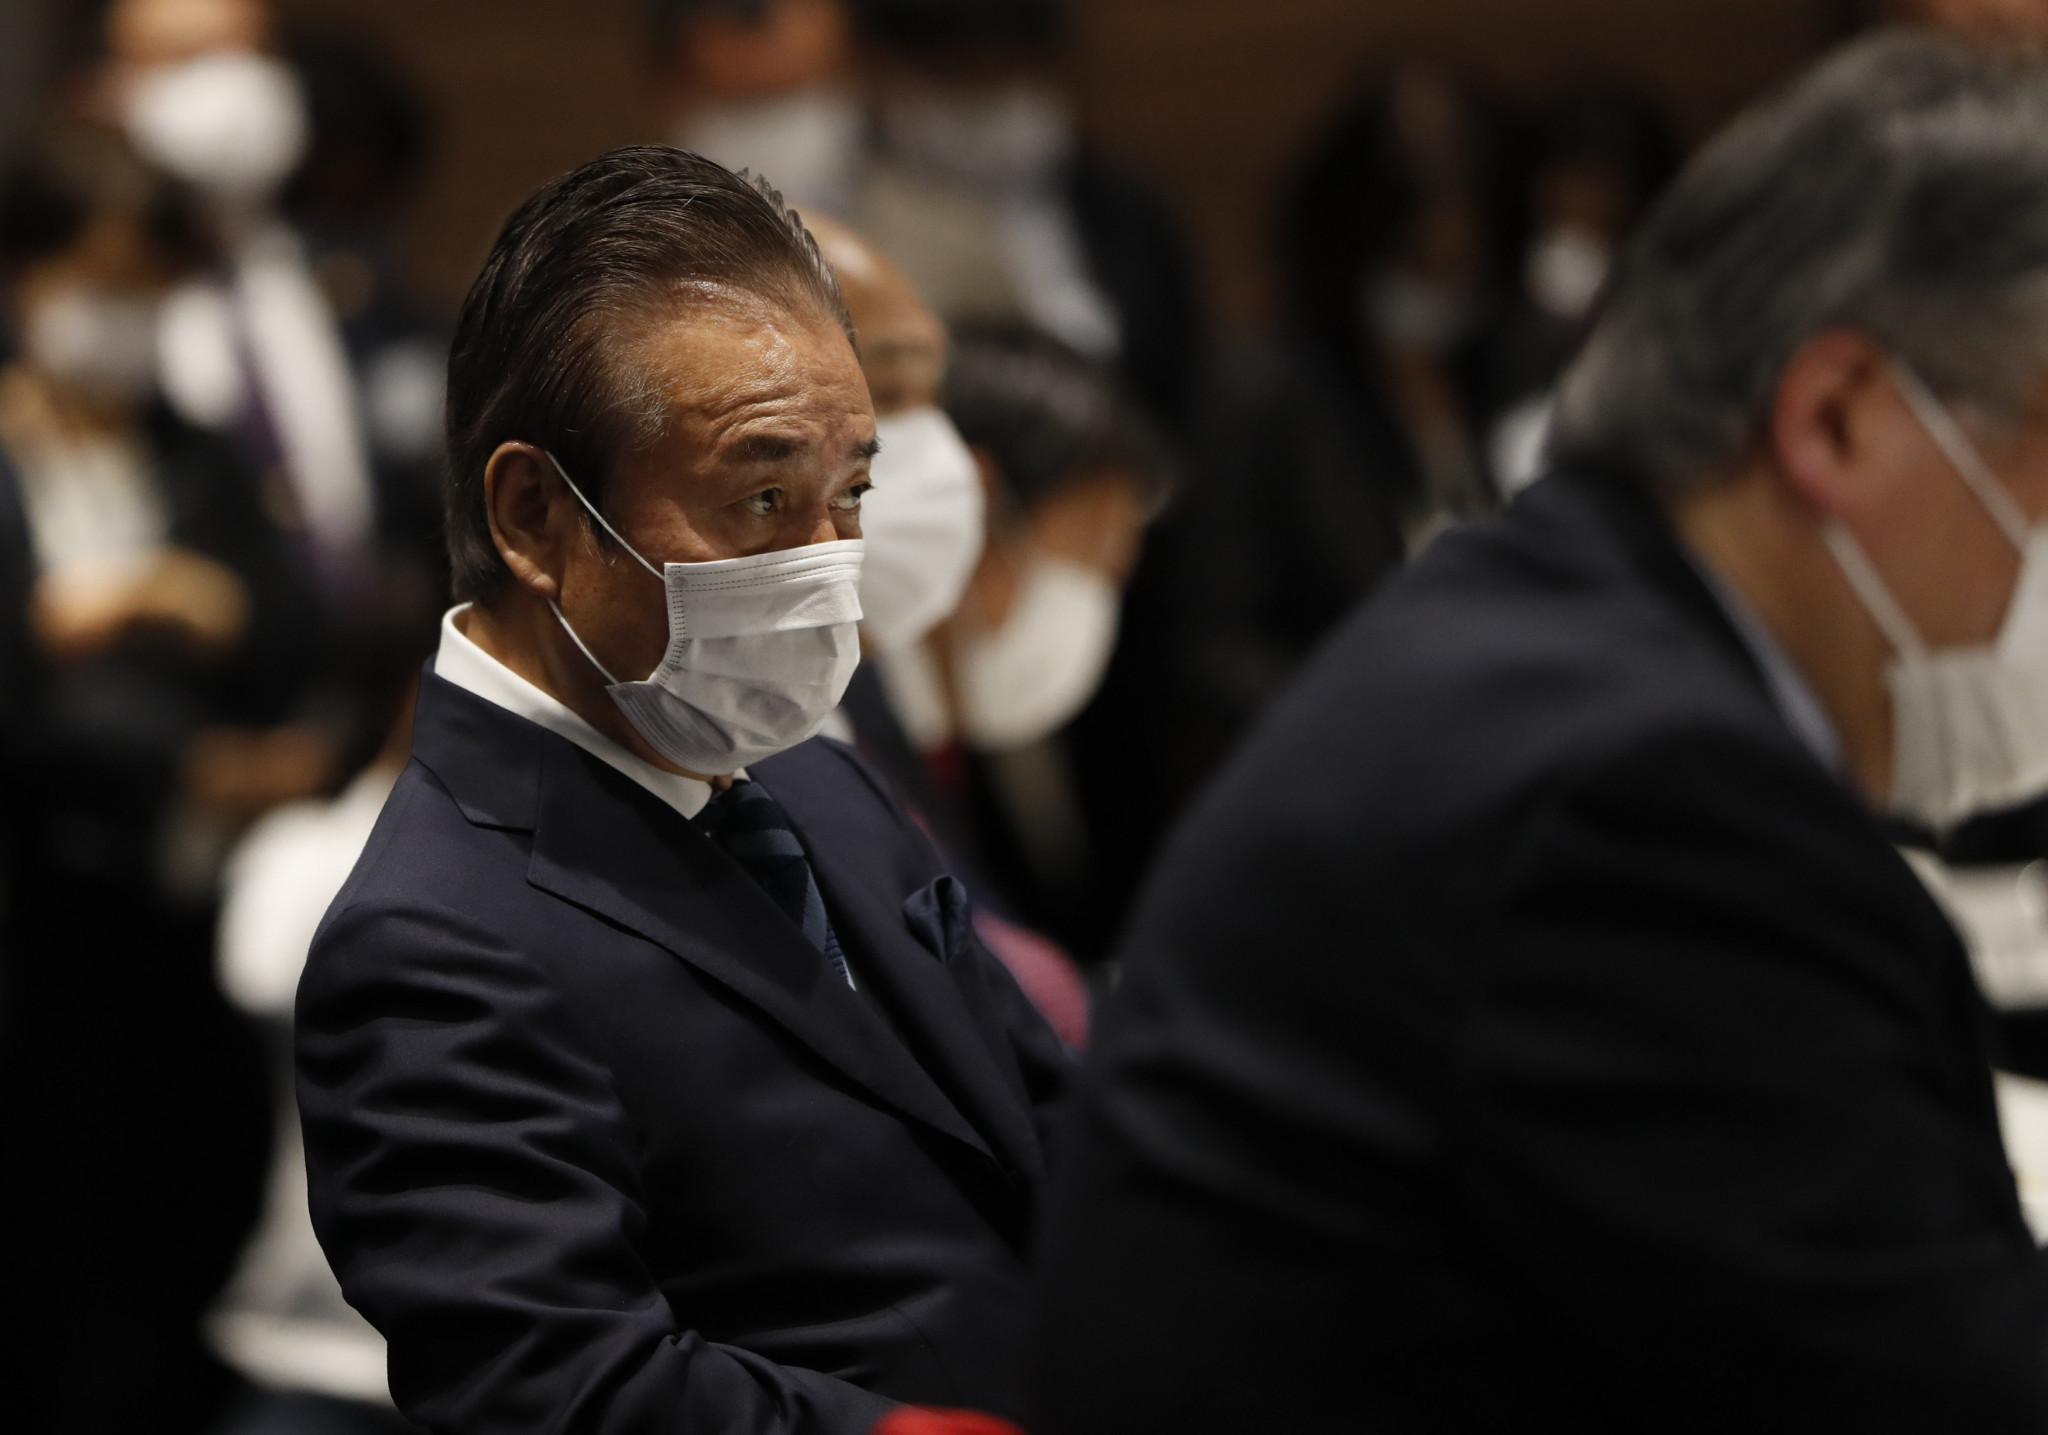 The arrest of former Tokyo 2020 Executive Board member Haruyuki Takahashi on allegations of corruption has had a big impact on Sapporo's bid for the 2030 Winter Olympics ©Getty Images